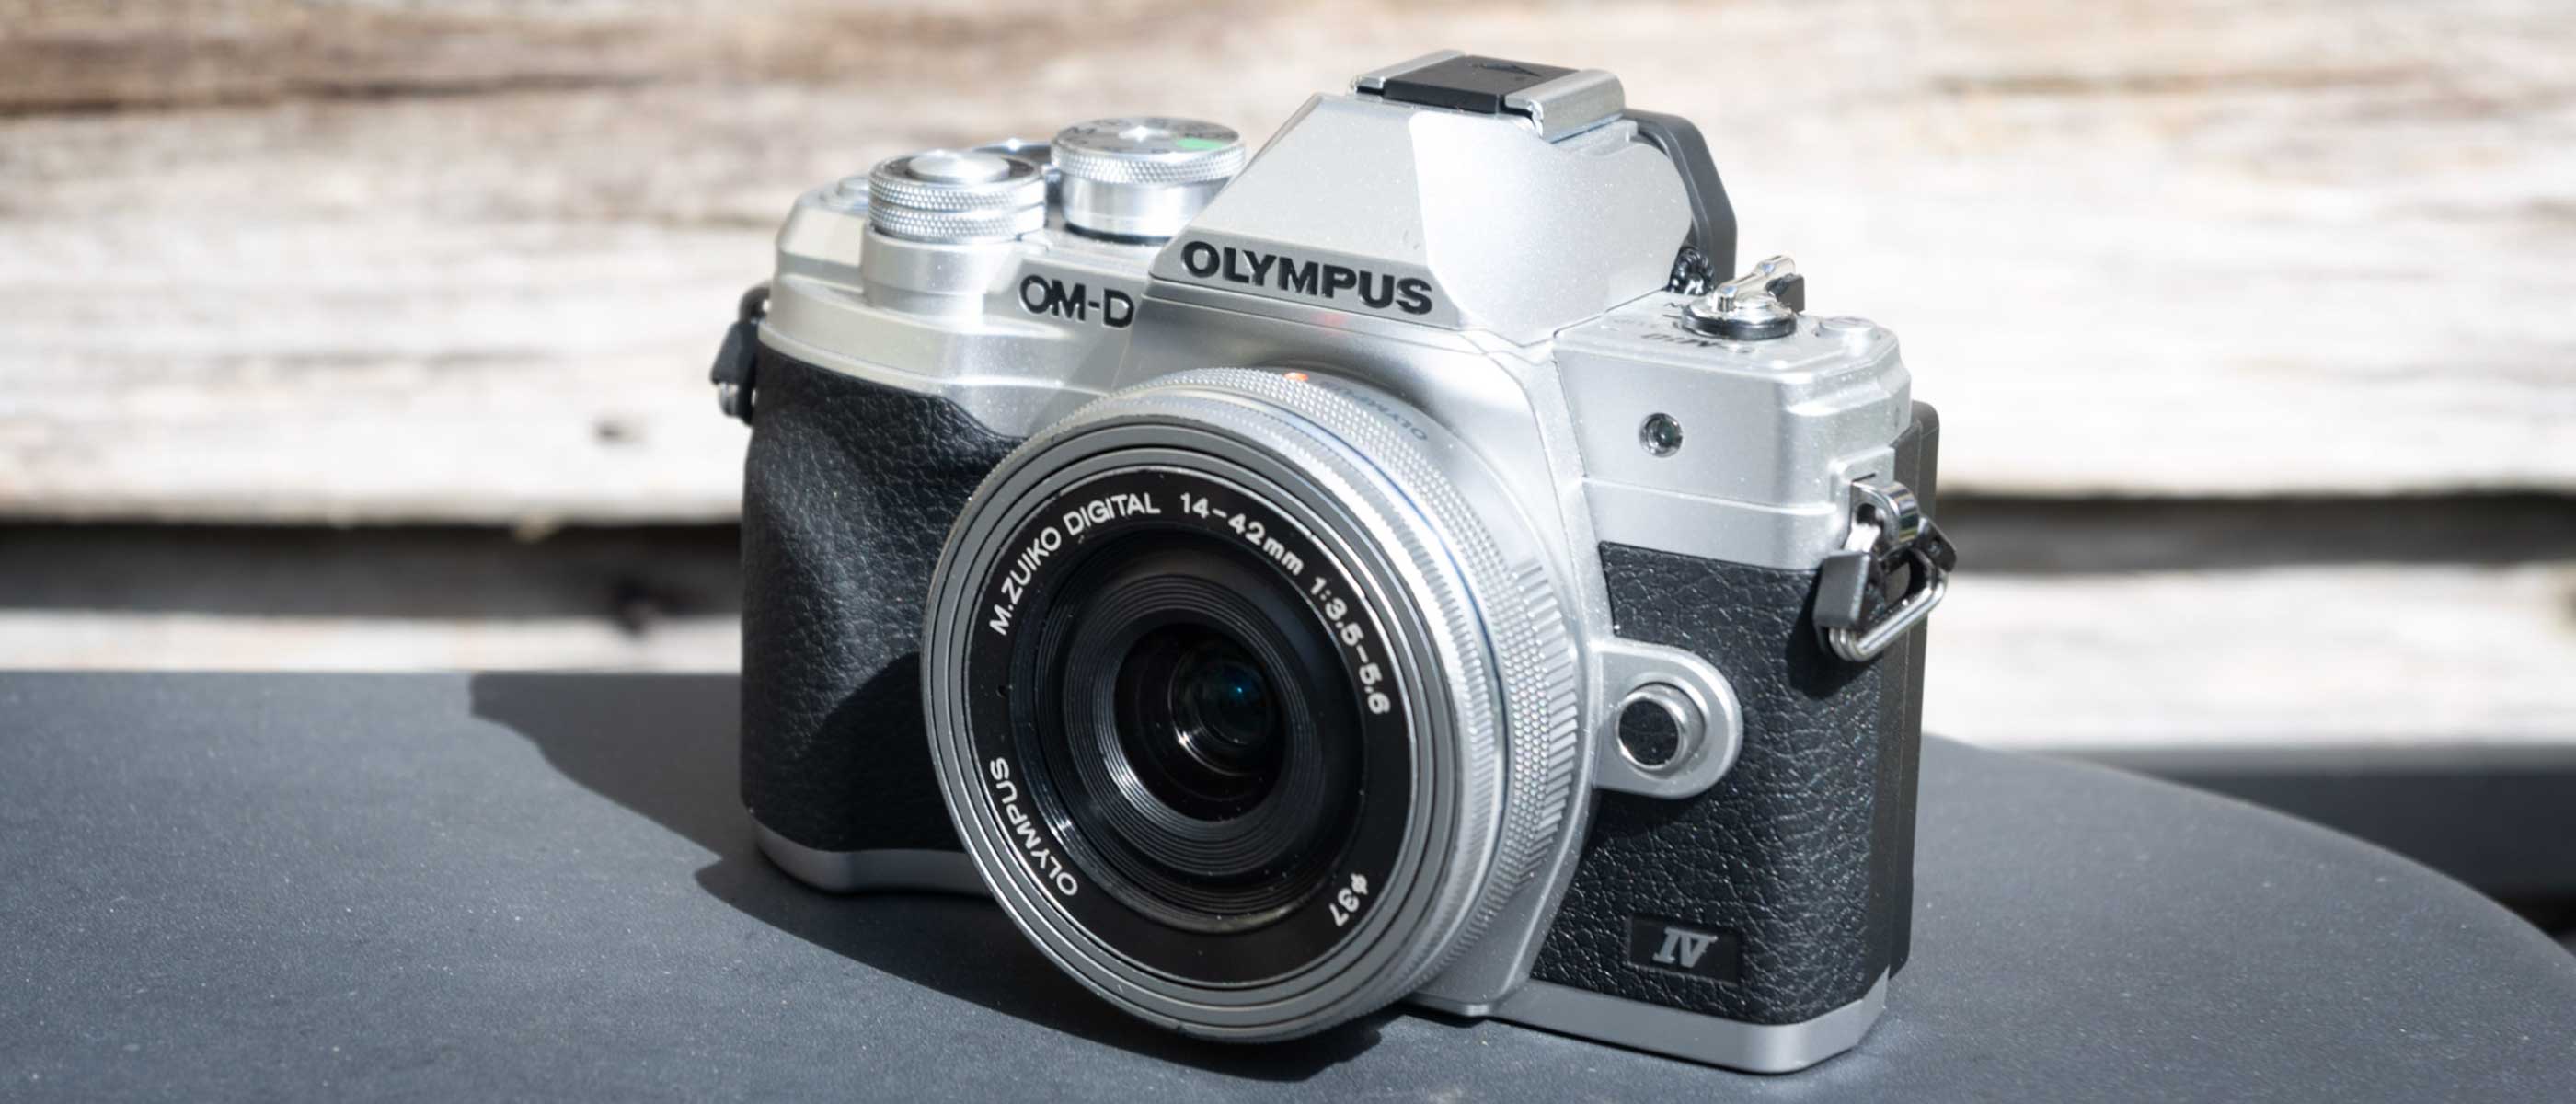 Snap up $225 off the Olympus OM-D E-M10 Mark IV this Cyber Monday